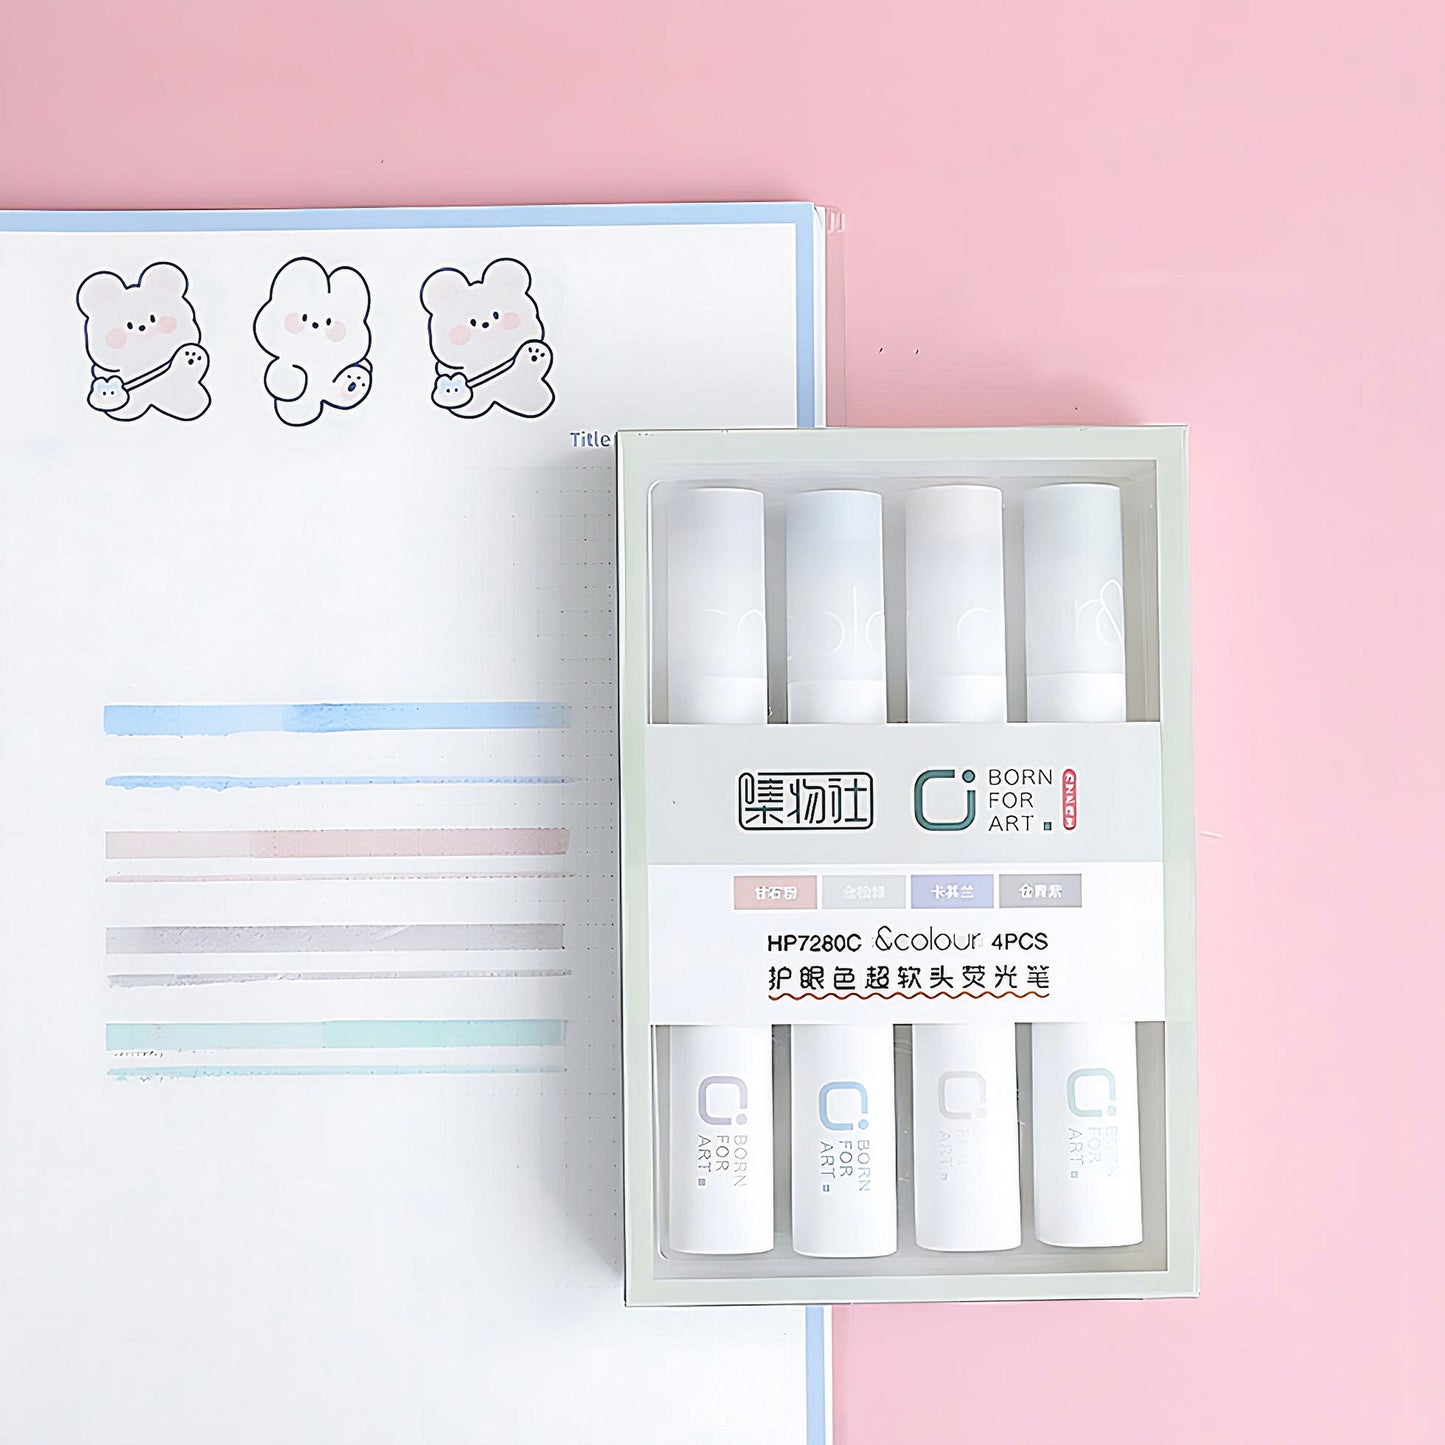 a square-shaped highlighter set in Milkshake style, pink background